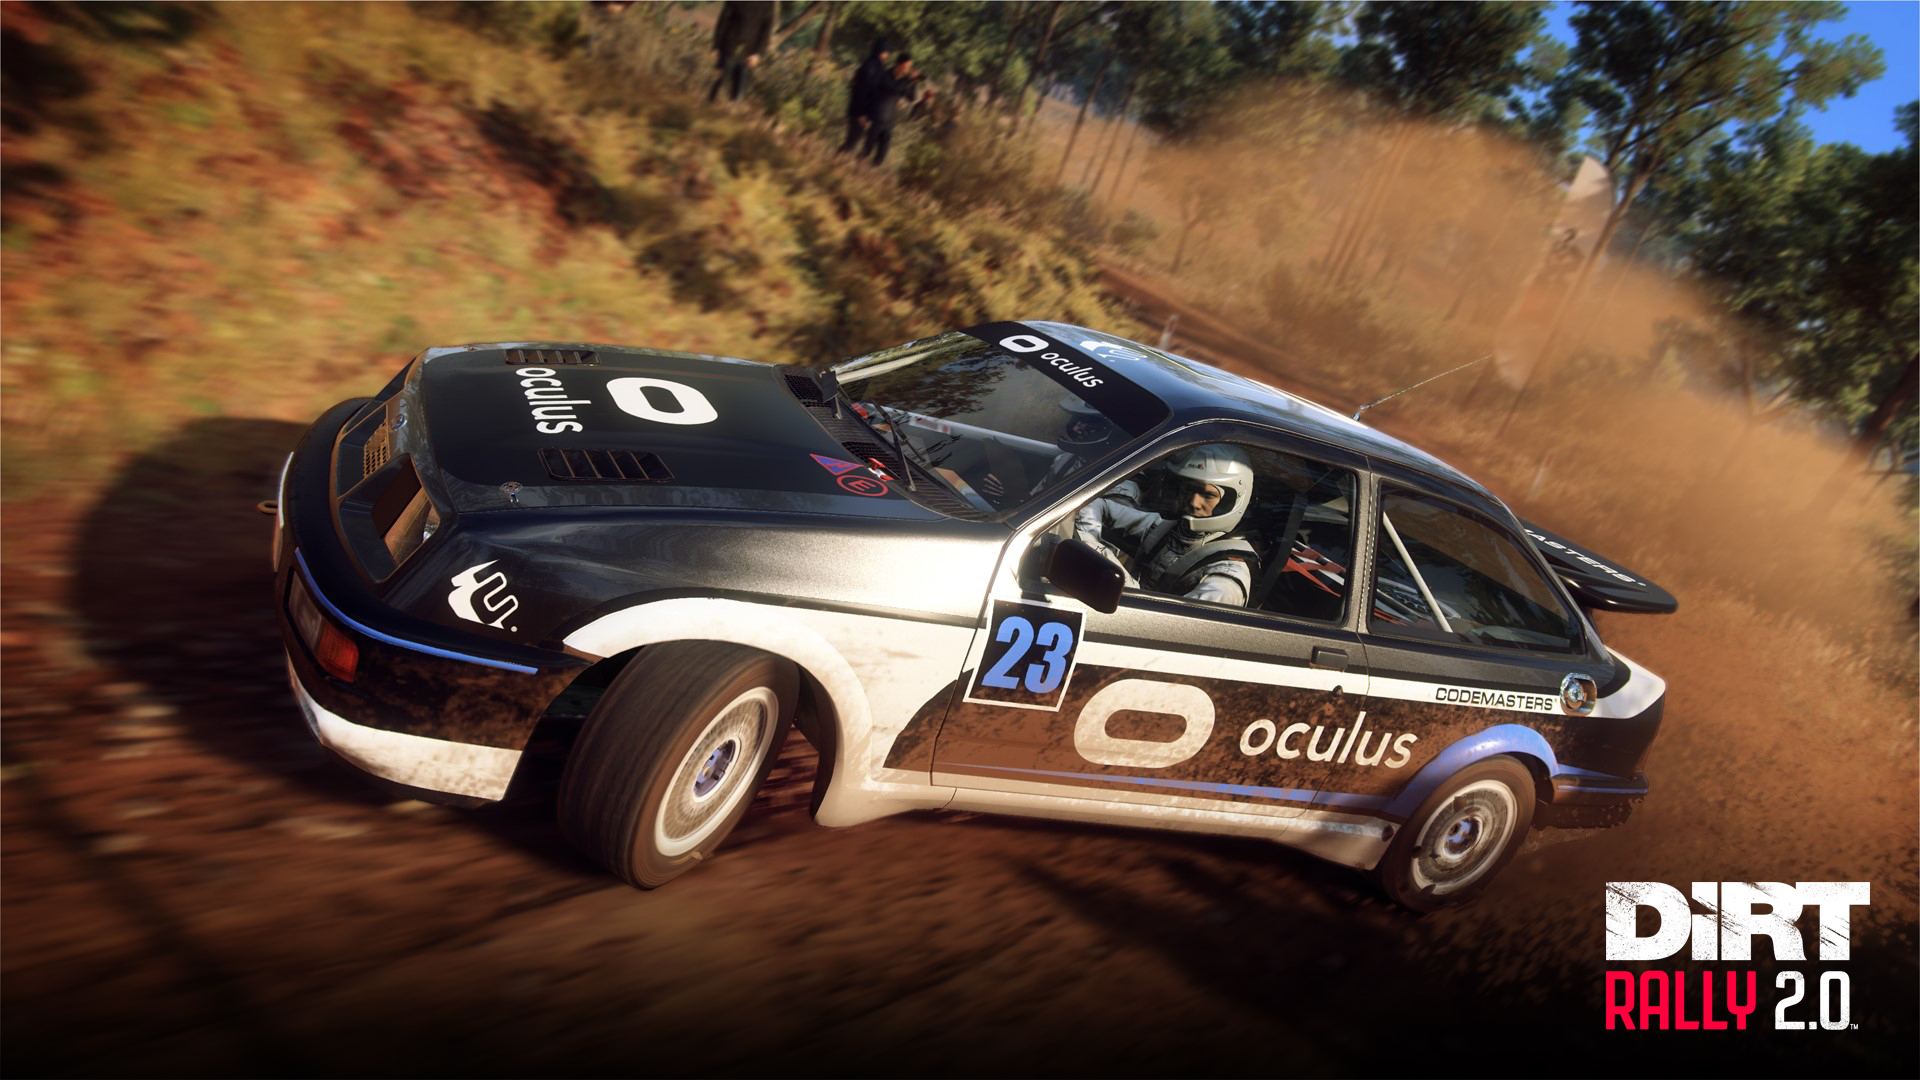 dirt rally 2.0 vr support